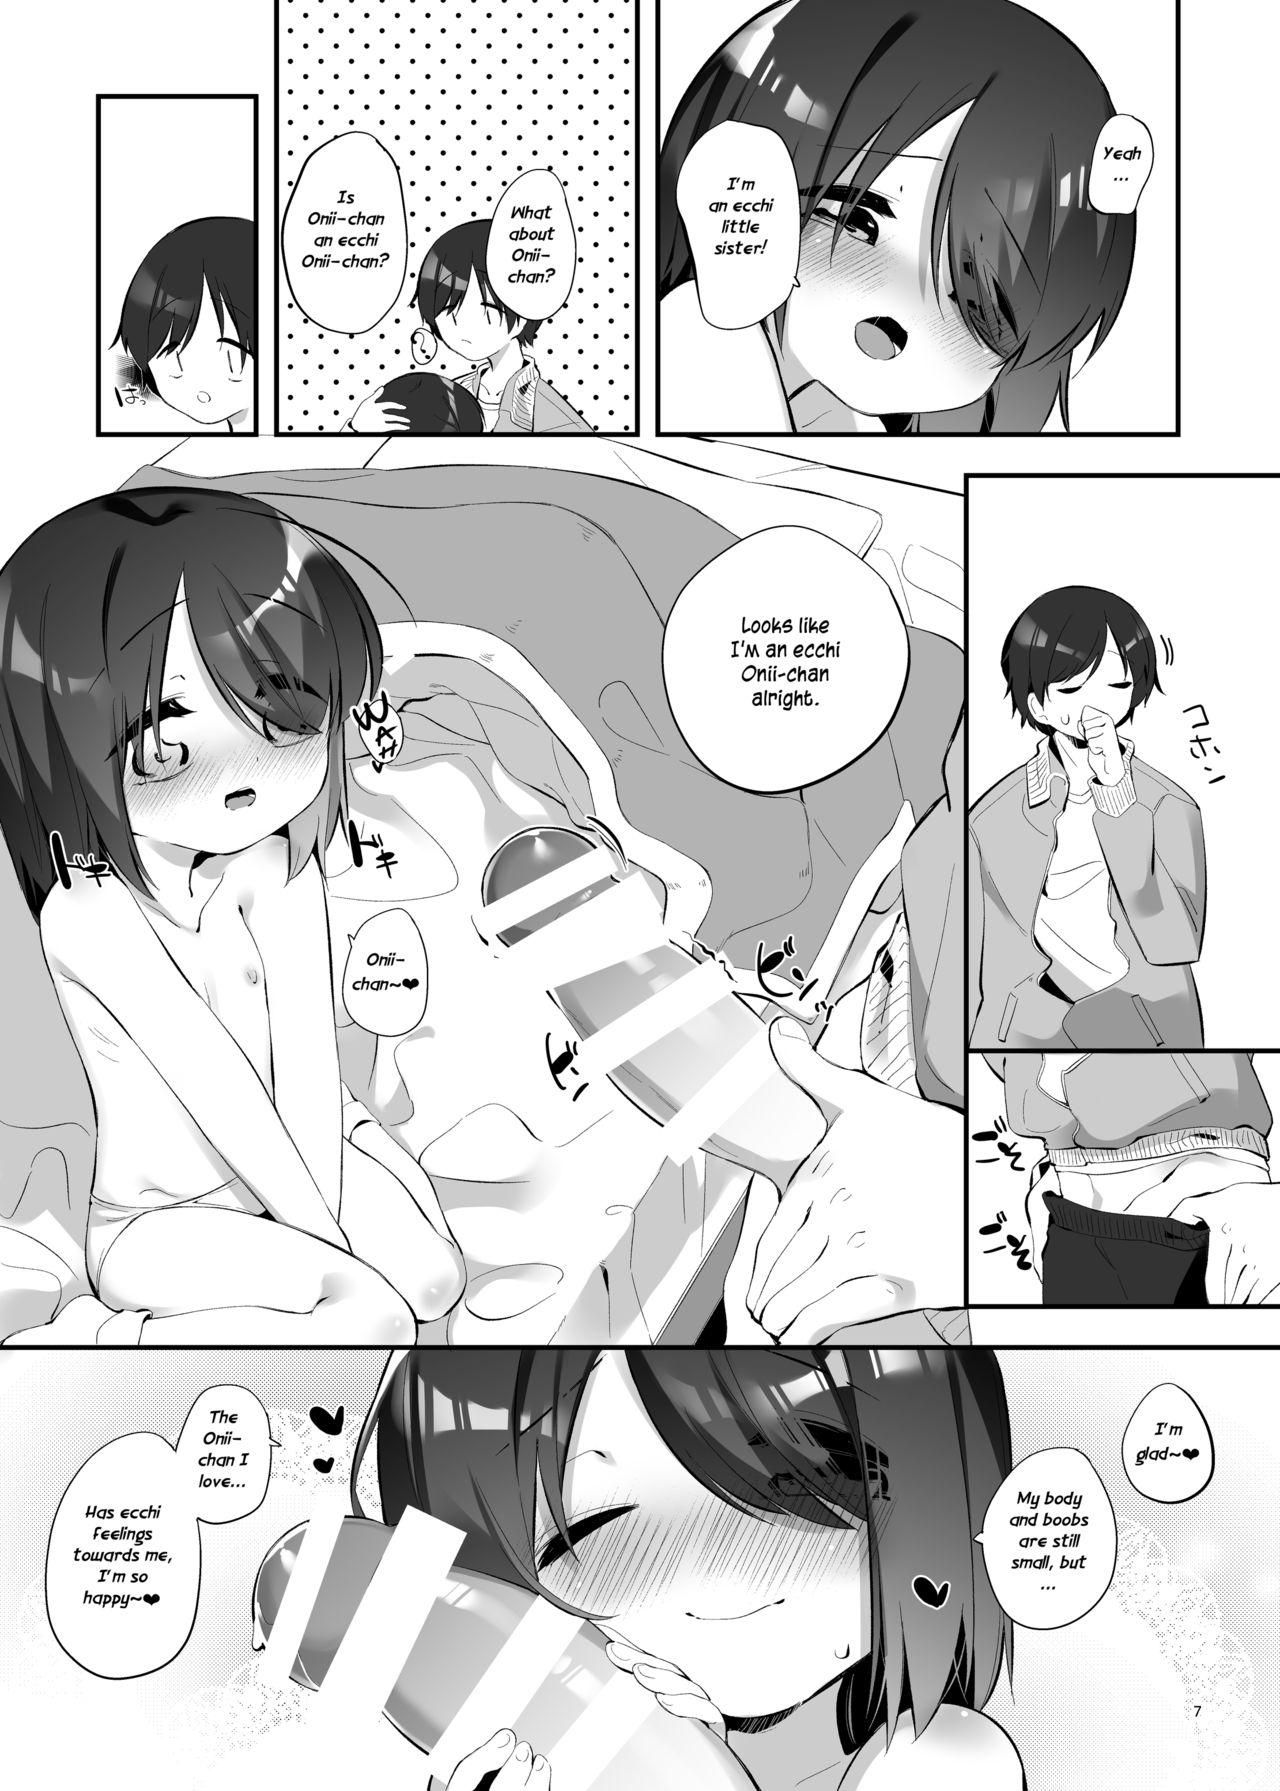 Pissing Imouto ni Hasamarete Shiawase Desho? 3 | Between Sisters, Are You Happy? 3 - Original Squirt - Page 6